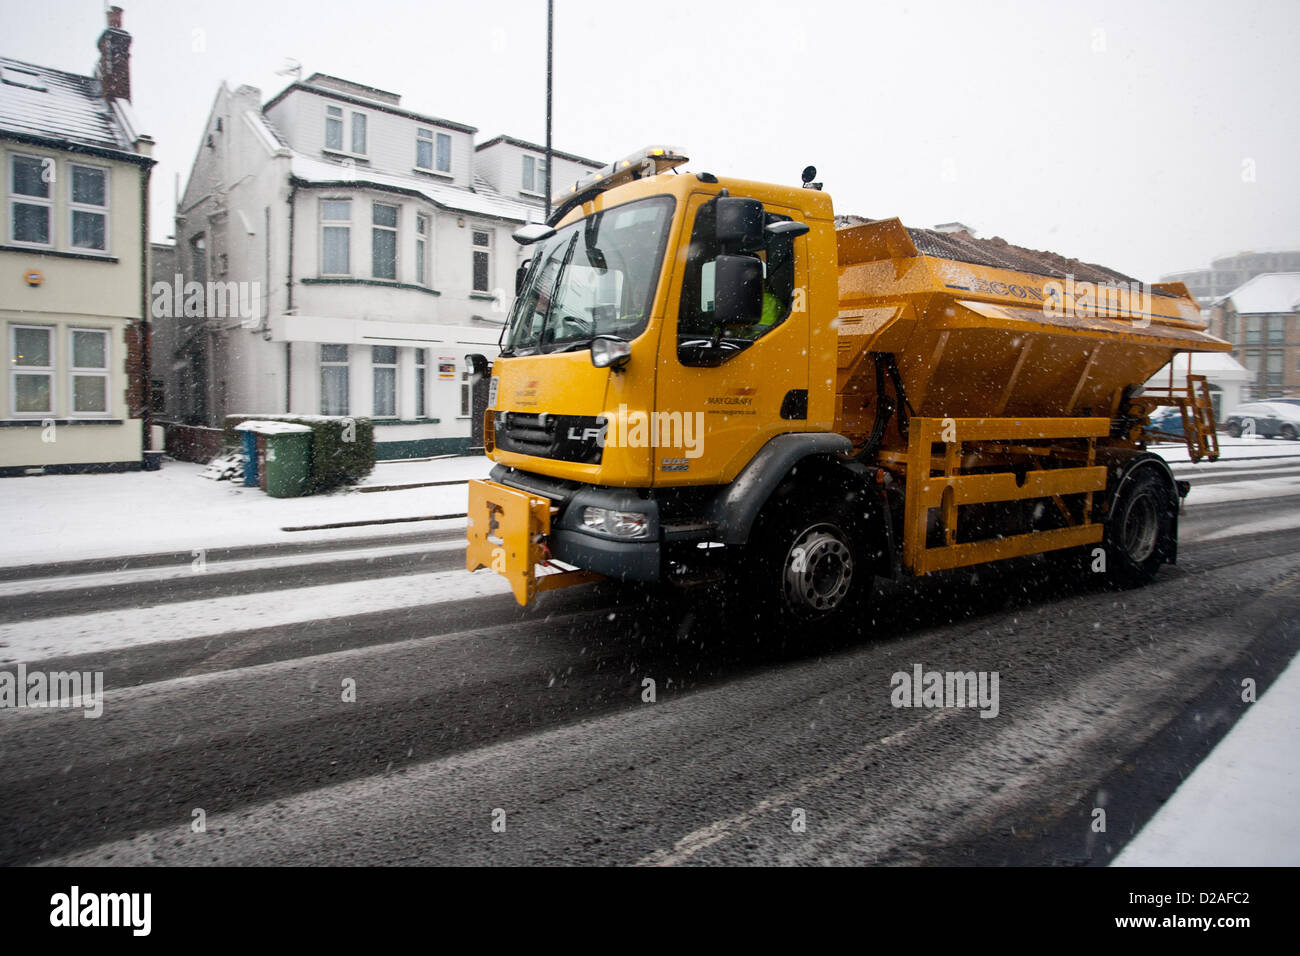 Harrow, London UK. 18th January 2013. (Pictured) A gritter truck on a icy road in London. Snow in Harrow and across the uk today Credit:  Peter Barbe / Alamy Live News Stock Photo